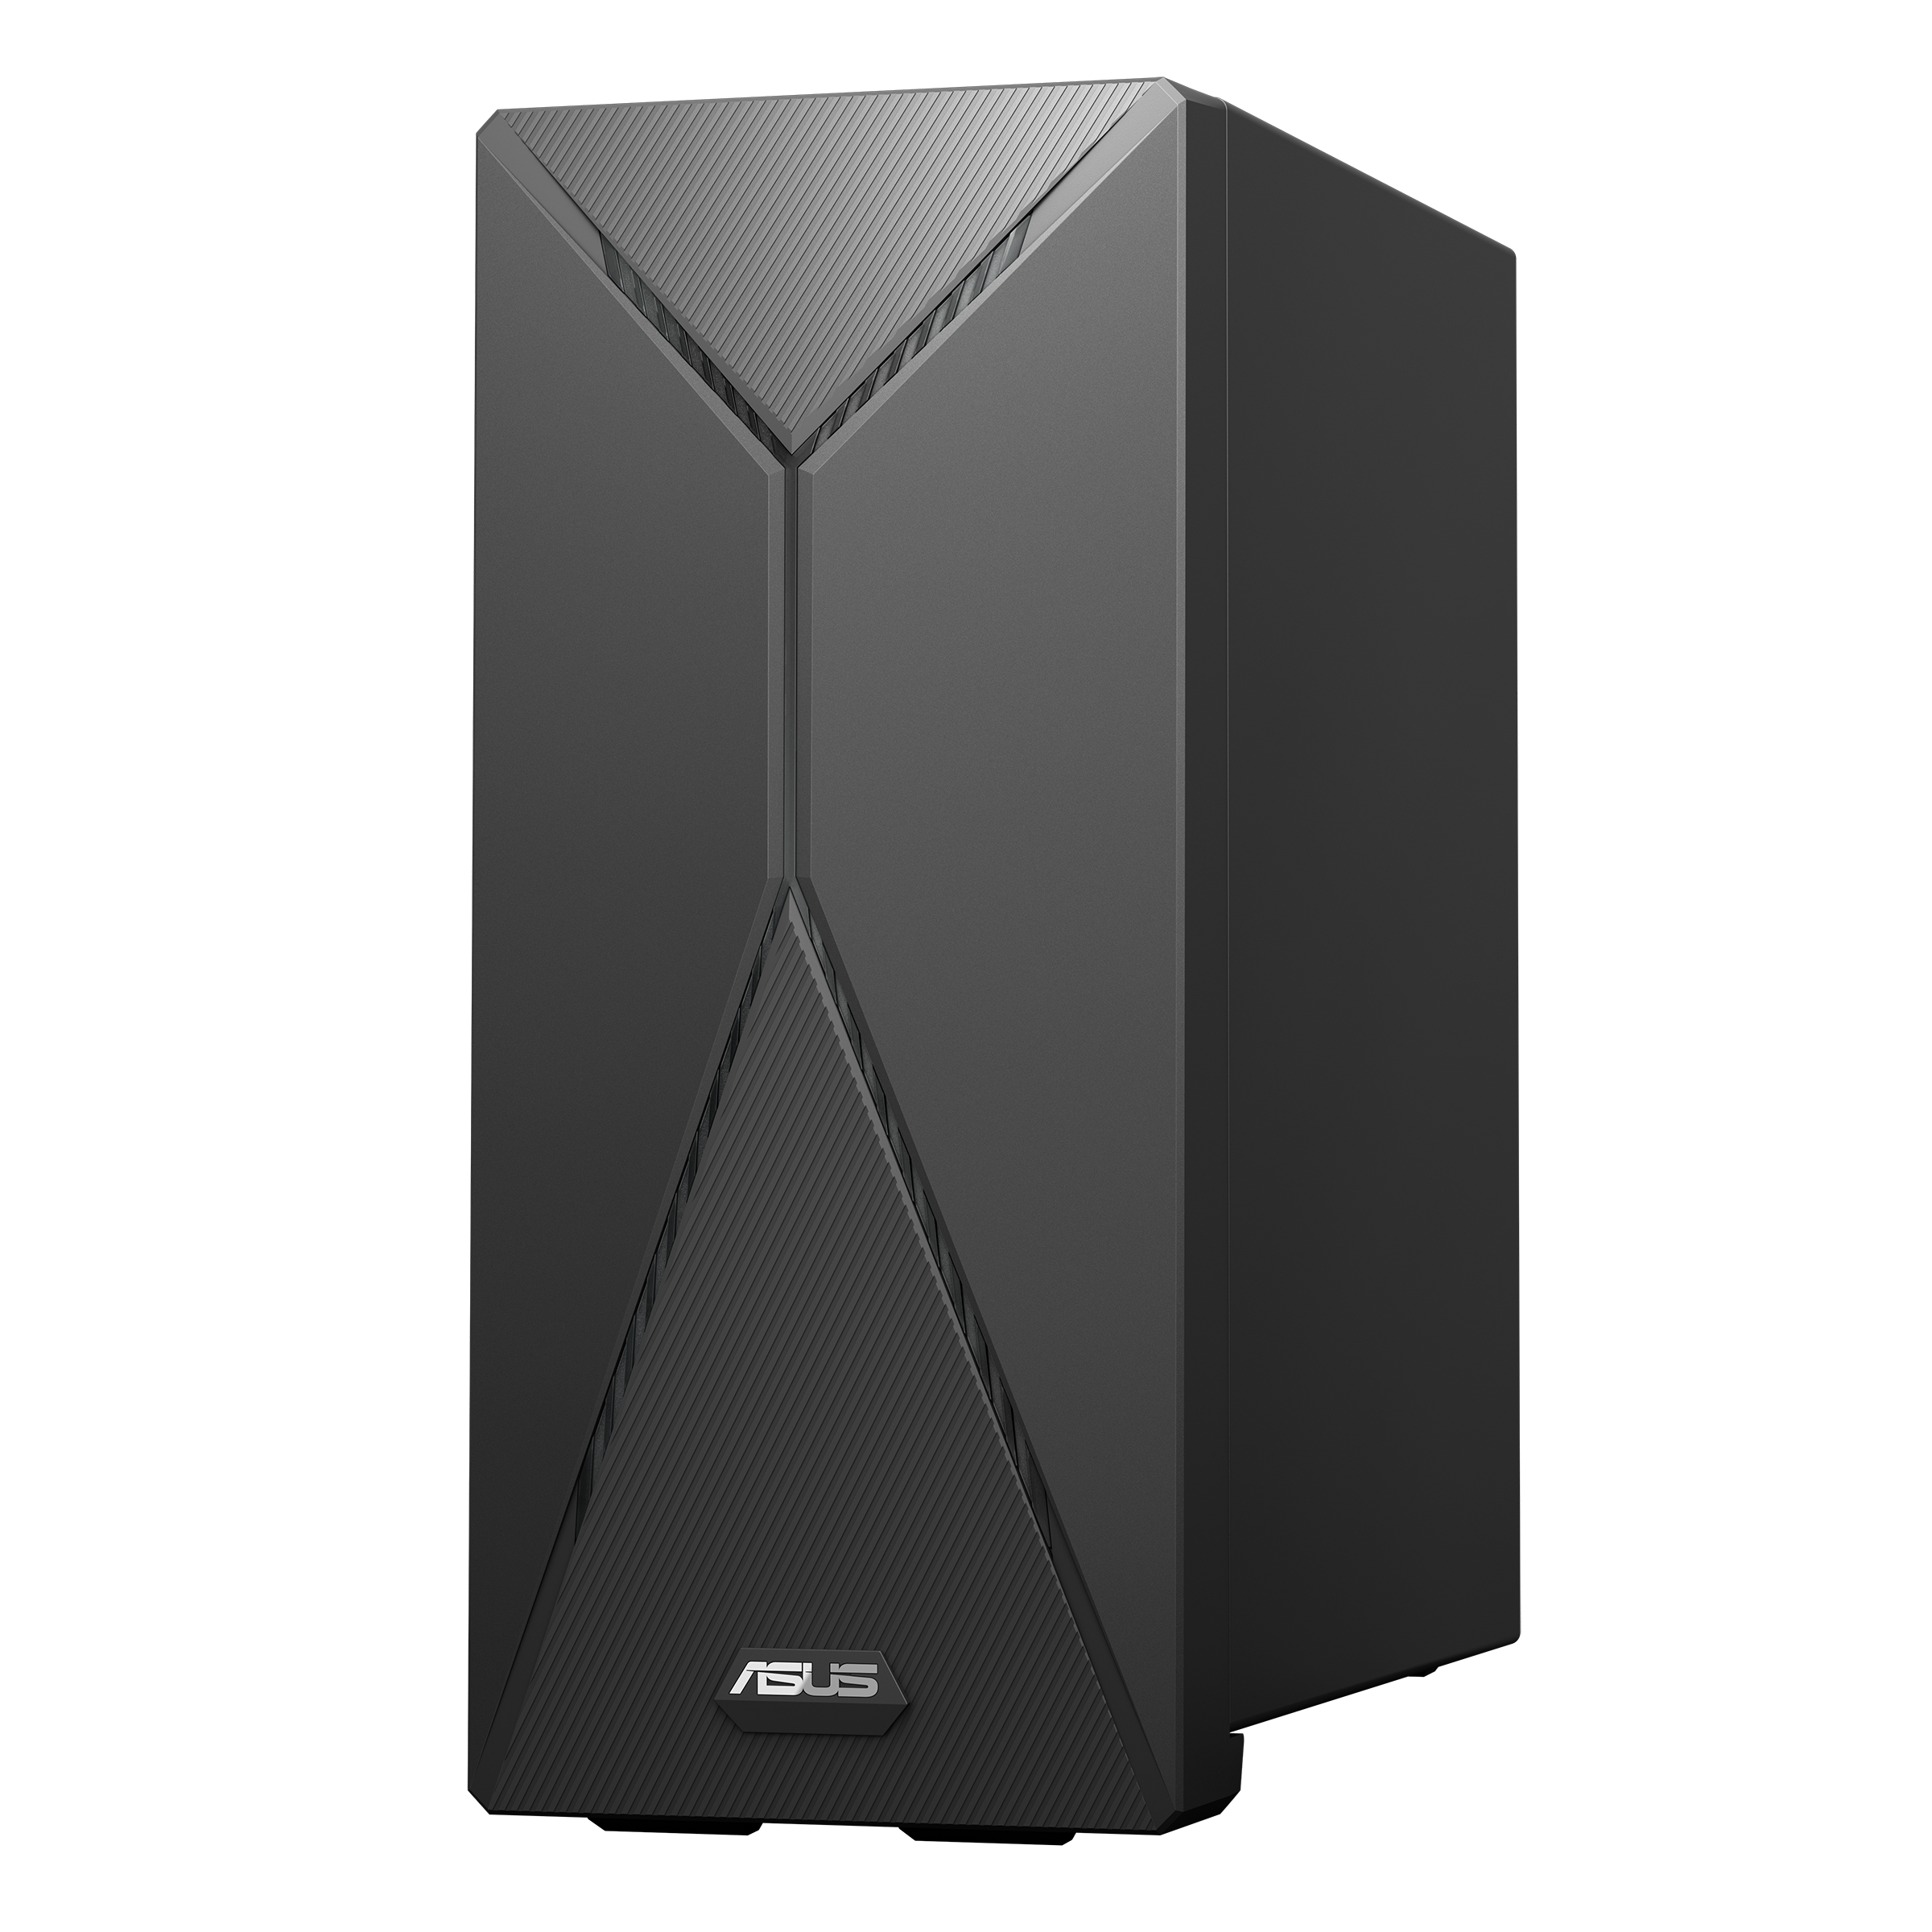 A left 45-degree-angled product shot of ASUS S5 Mini Tower (S501MER)